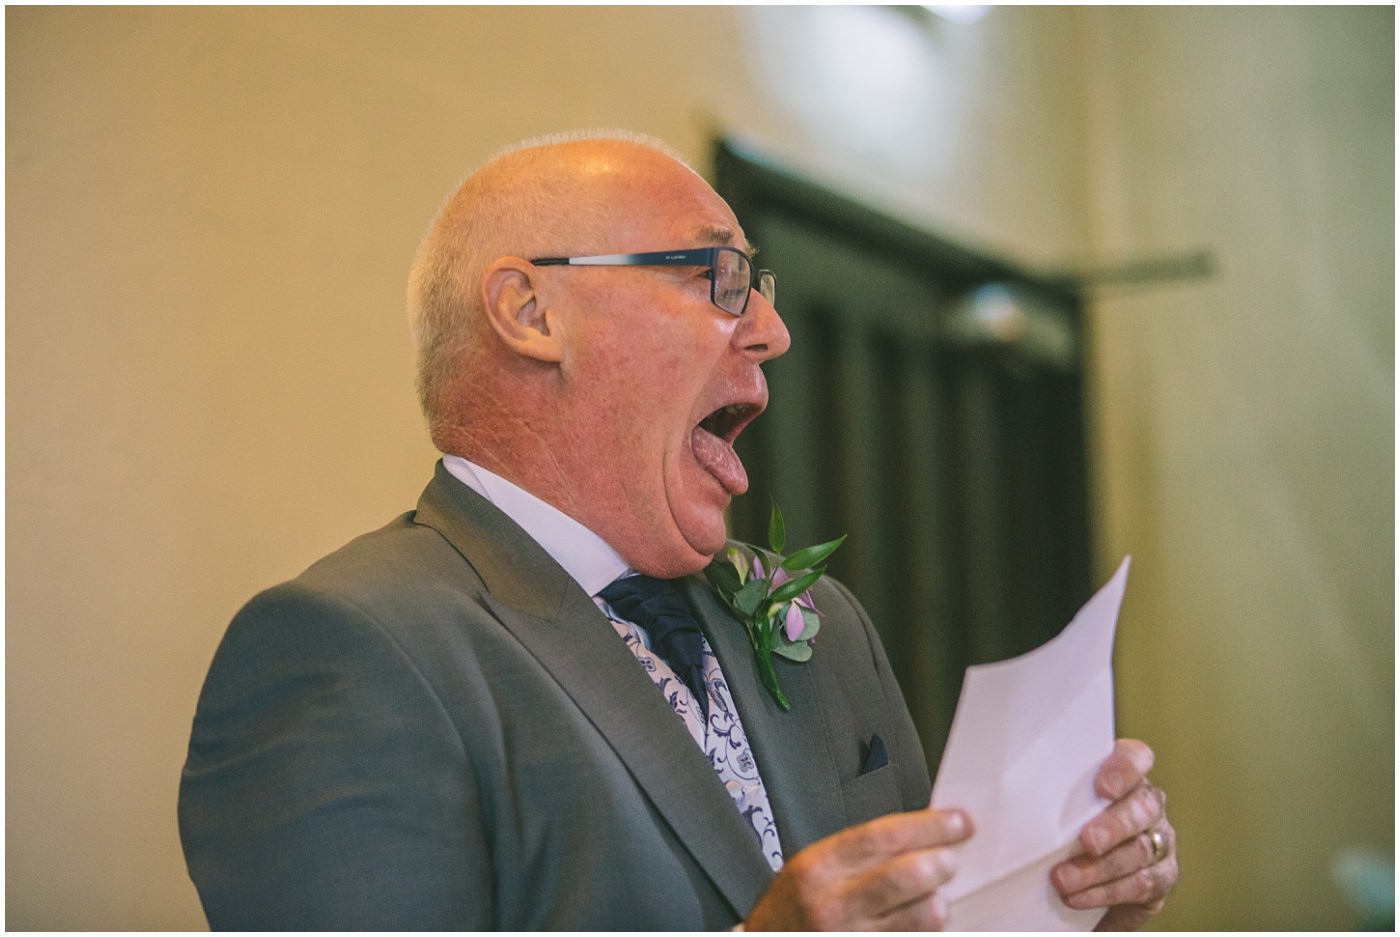 Father of the bride gets over excited during his speech